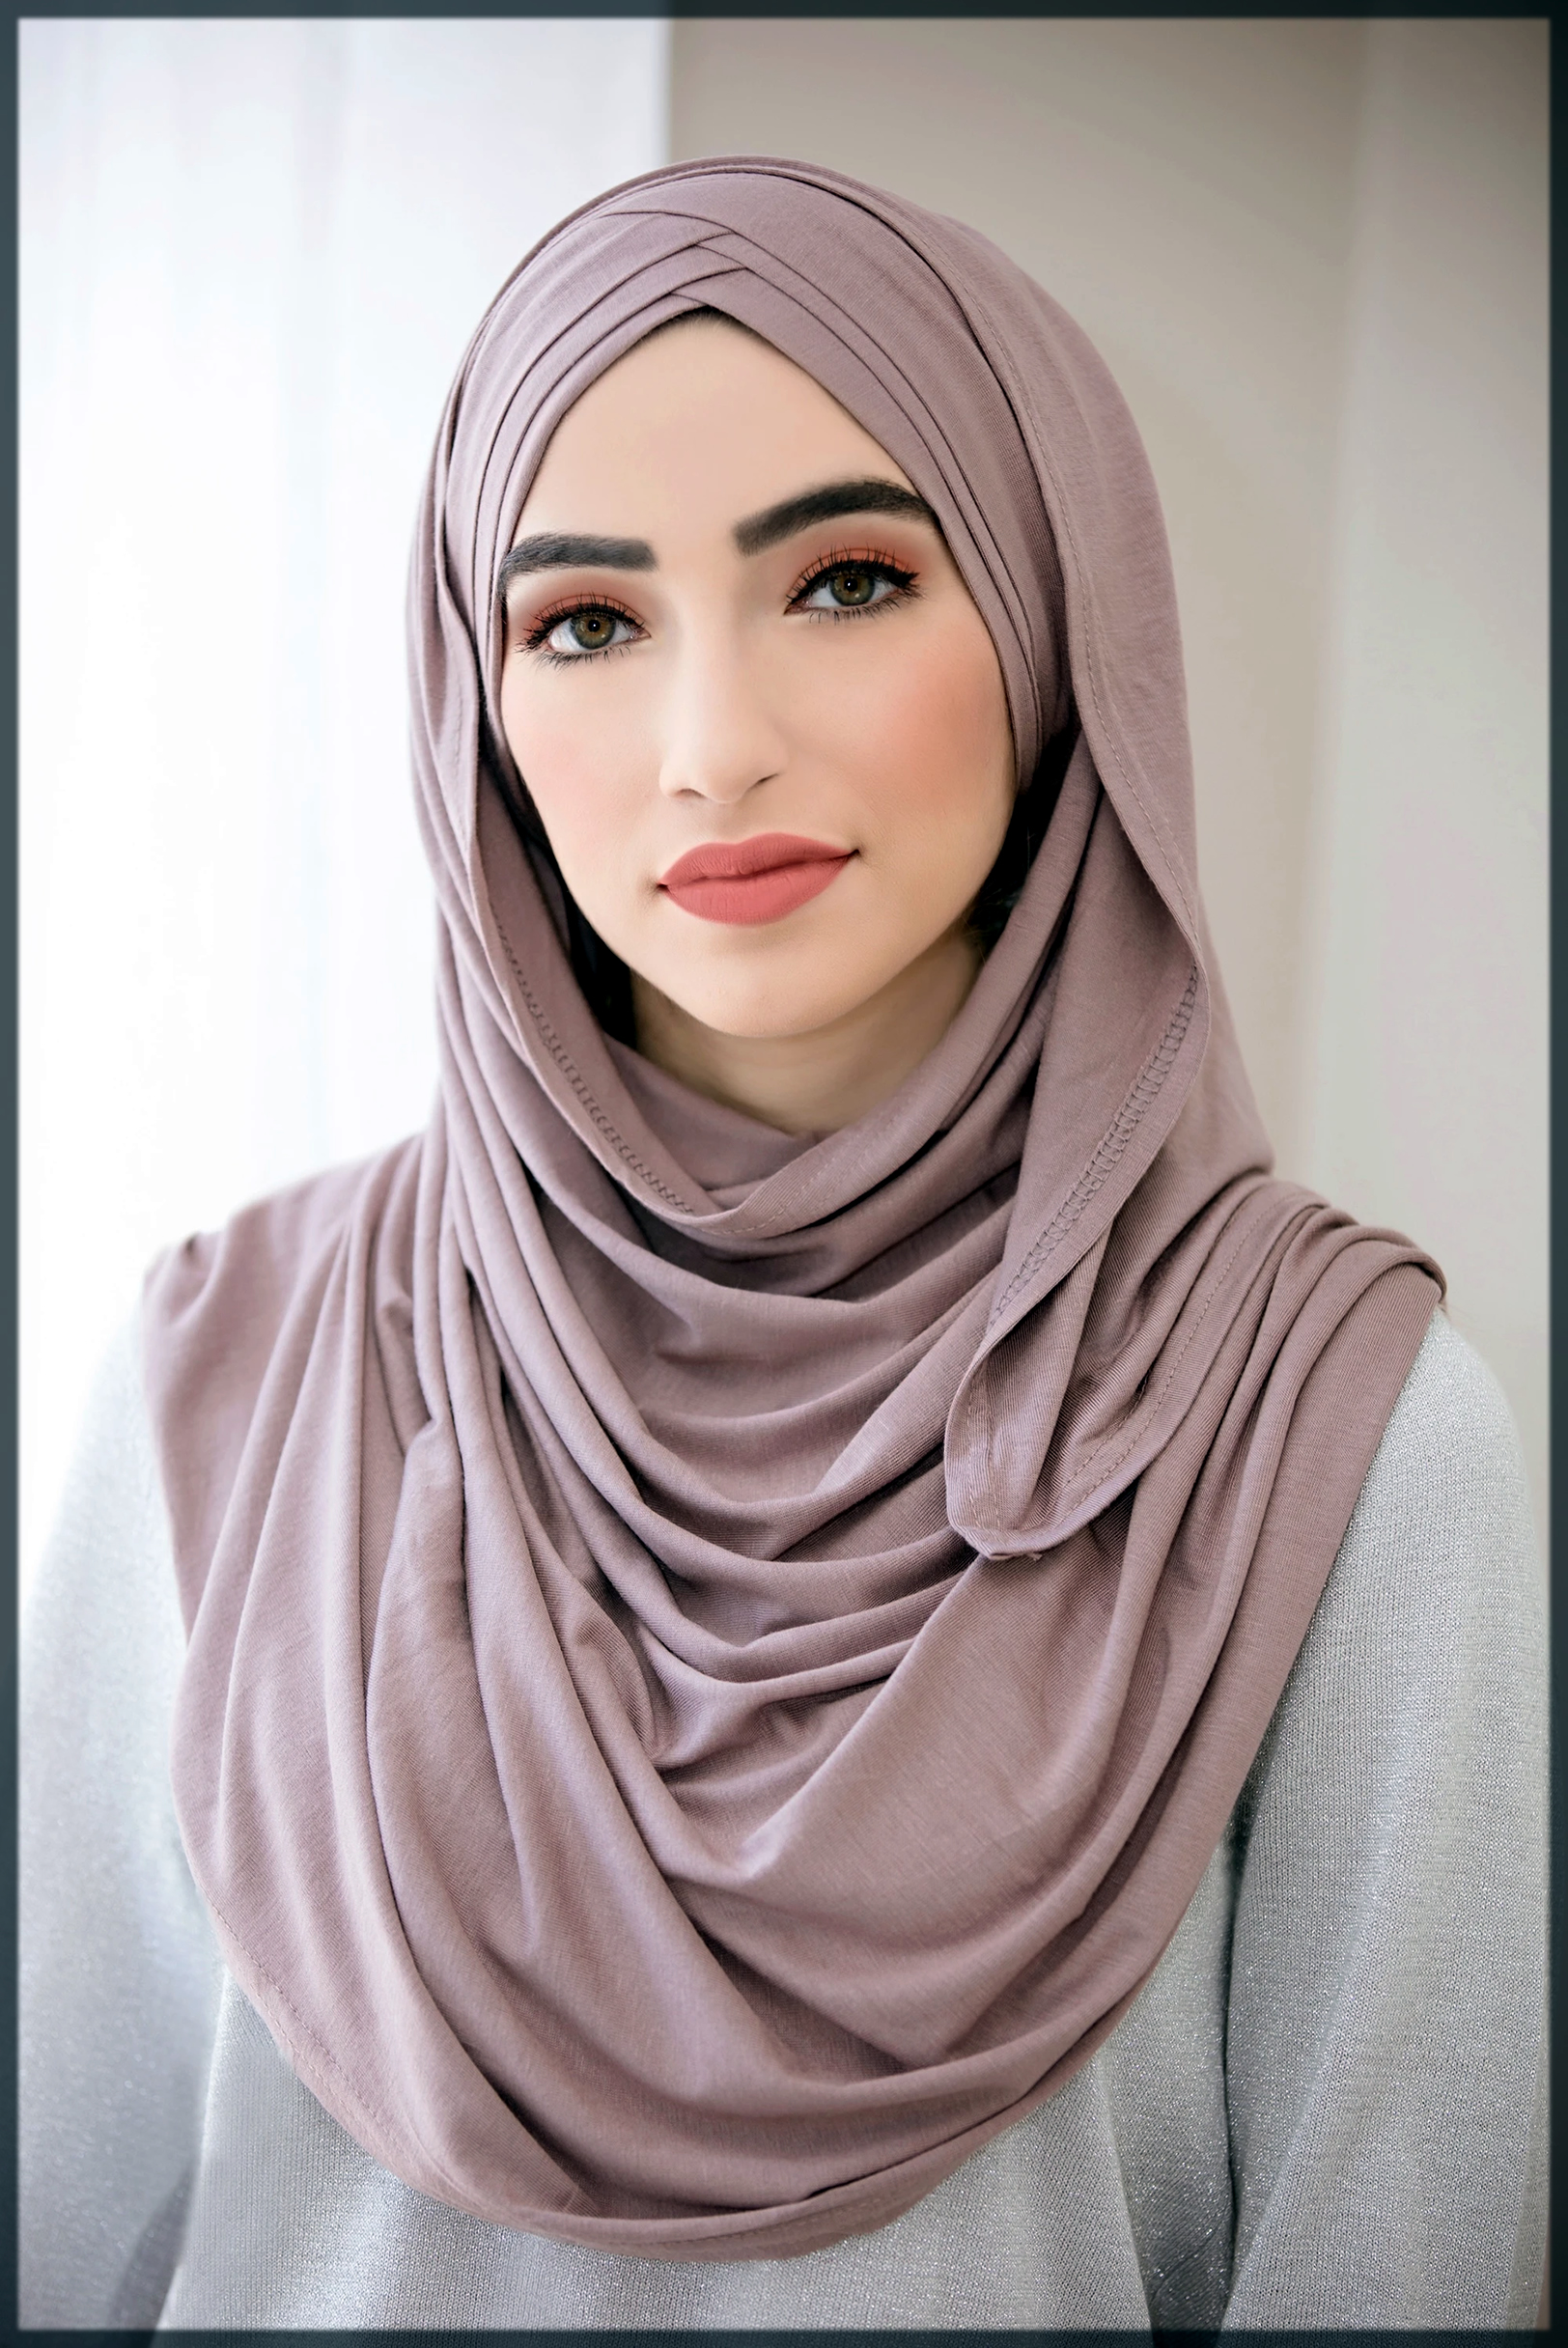 Hijab - » What Hijab That Suits Your Face? / 2 054 586 tykkäystä · 2 ...